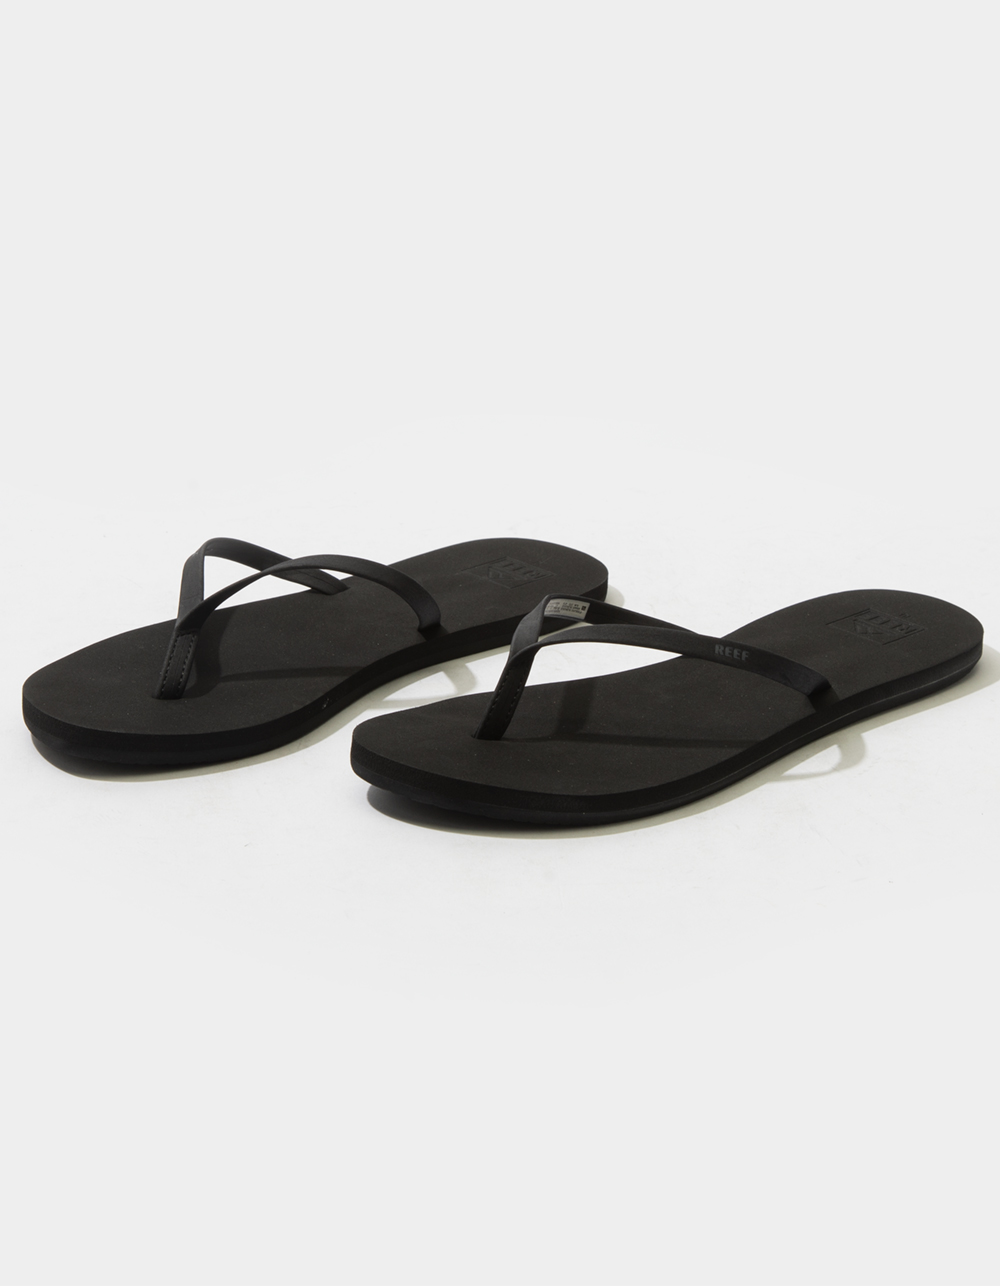 REEF Bliss Nights Womens Sandals